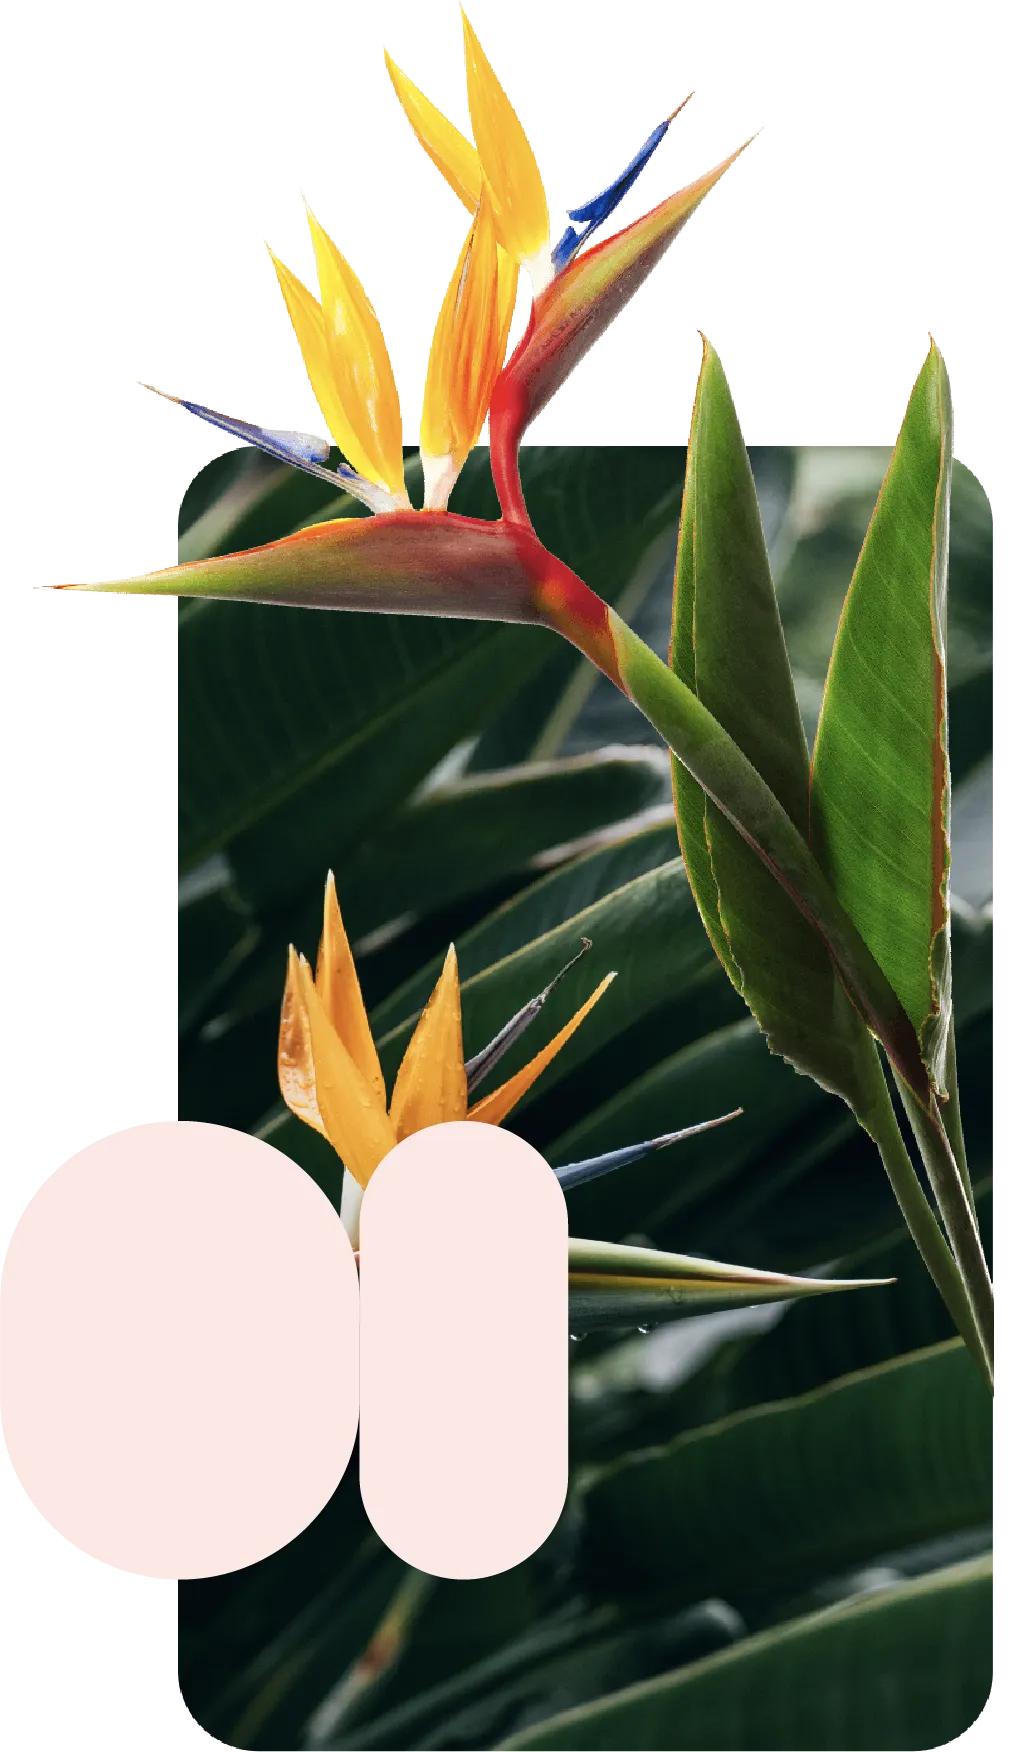 An image of a Lens identify use case showing Birds of Paradise plants with overlaying pink shapes and a product card.